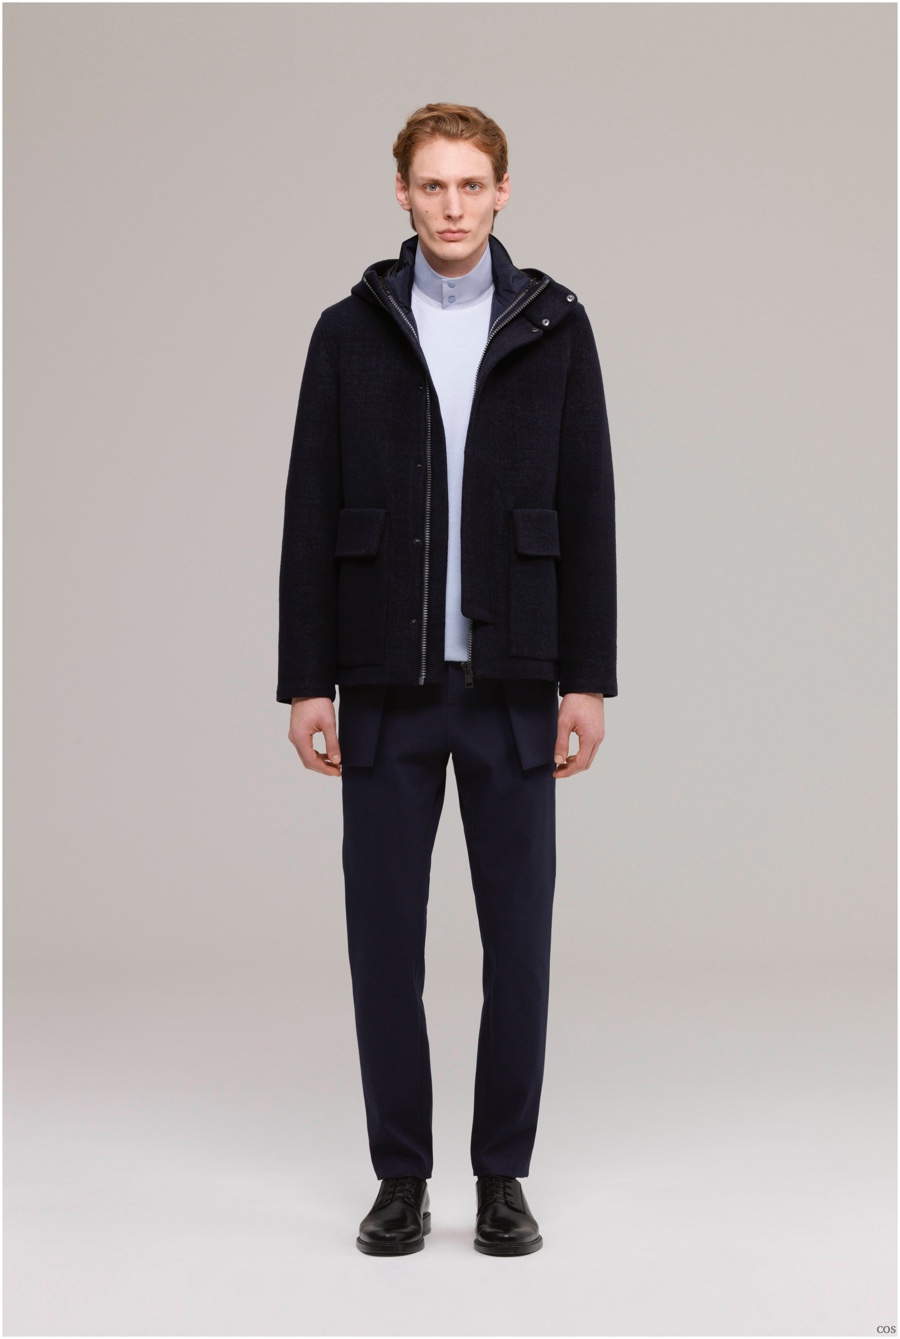 COS Fall/Winter 2015 Menswear Collection